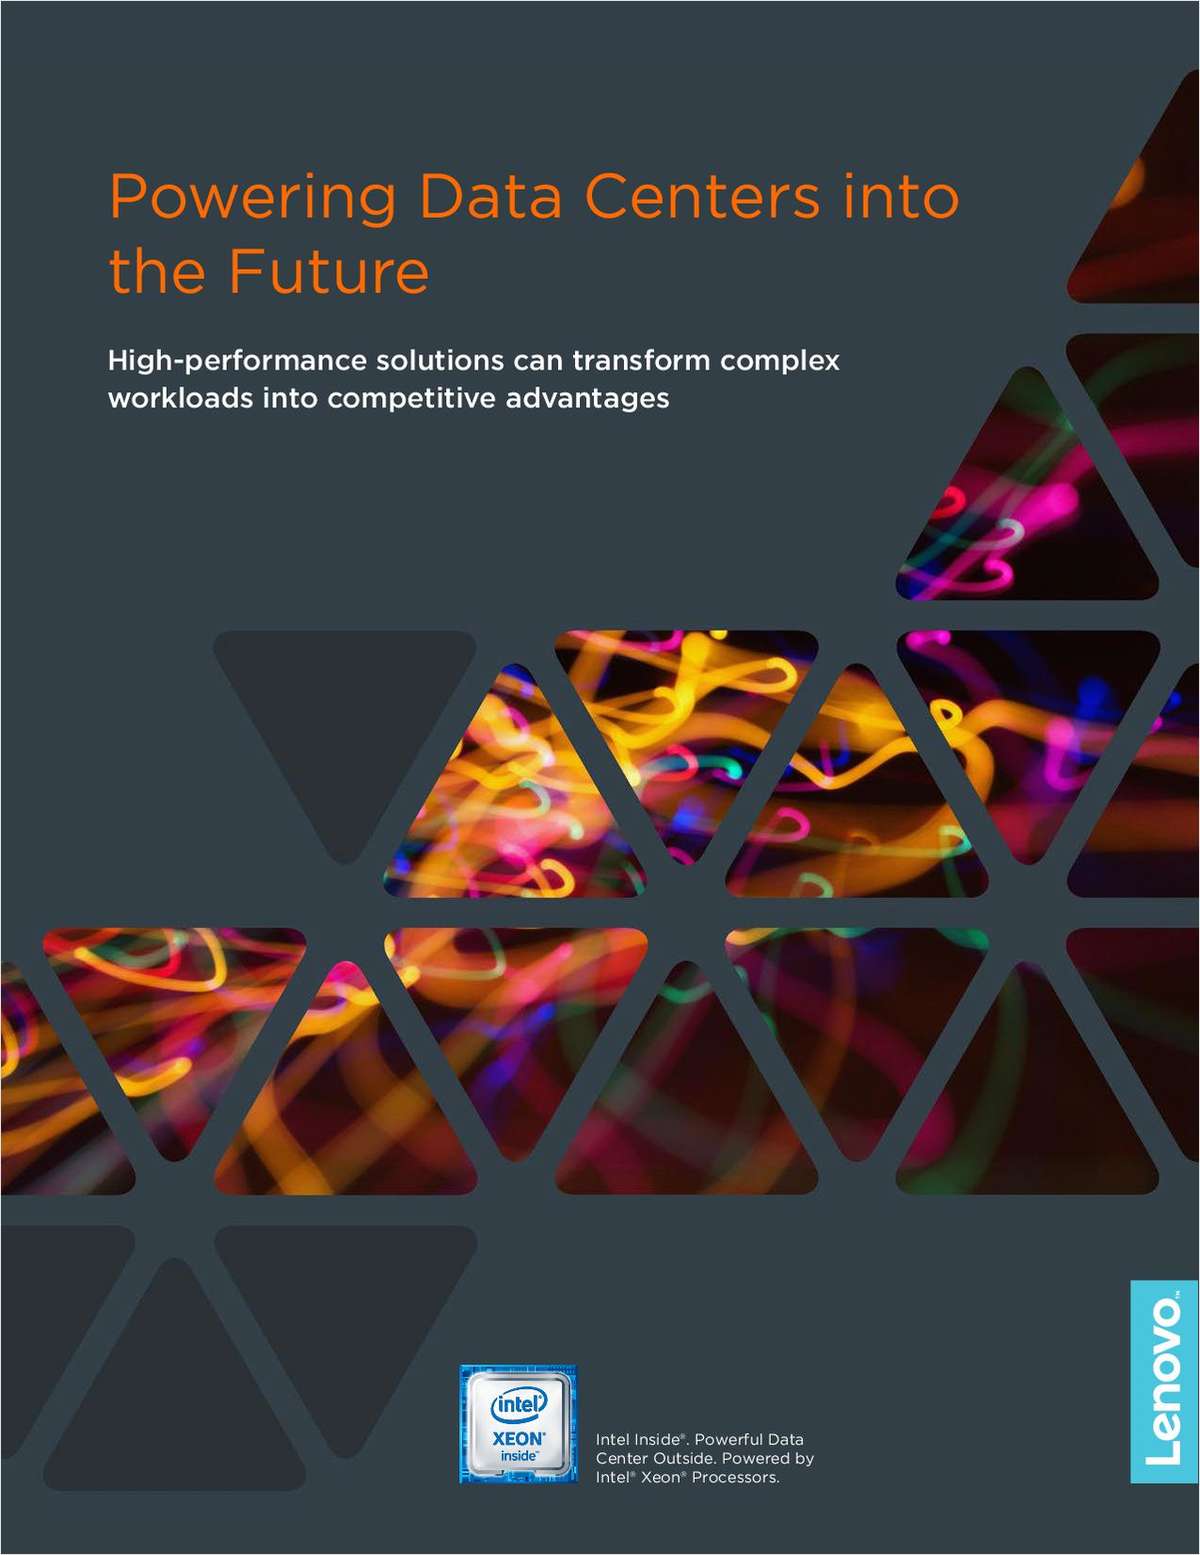 How to Power Your Data Center into the Future with HPC